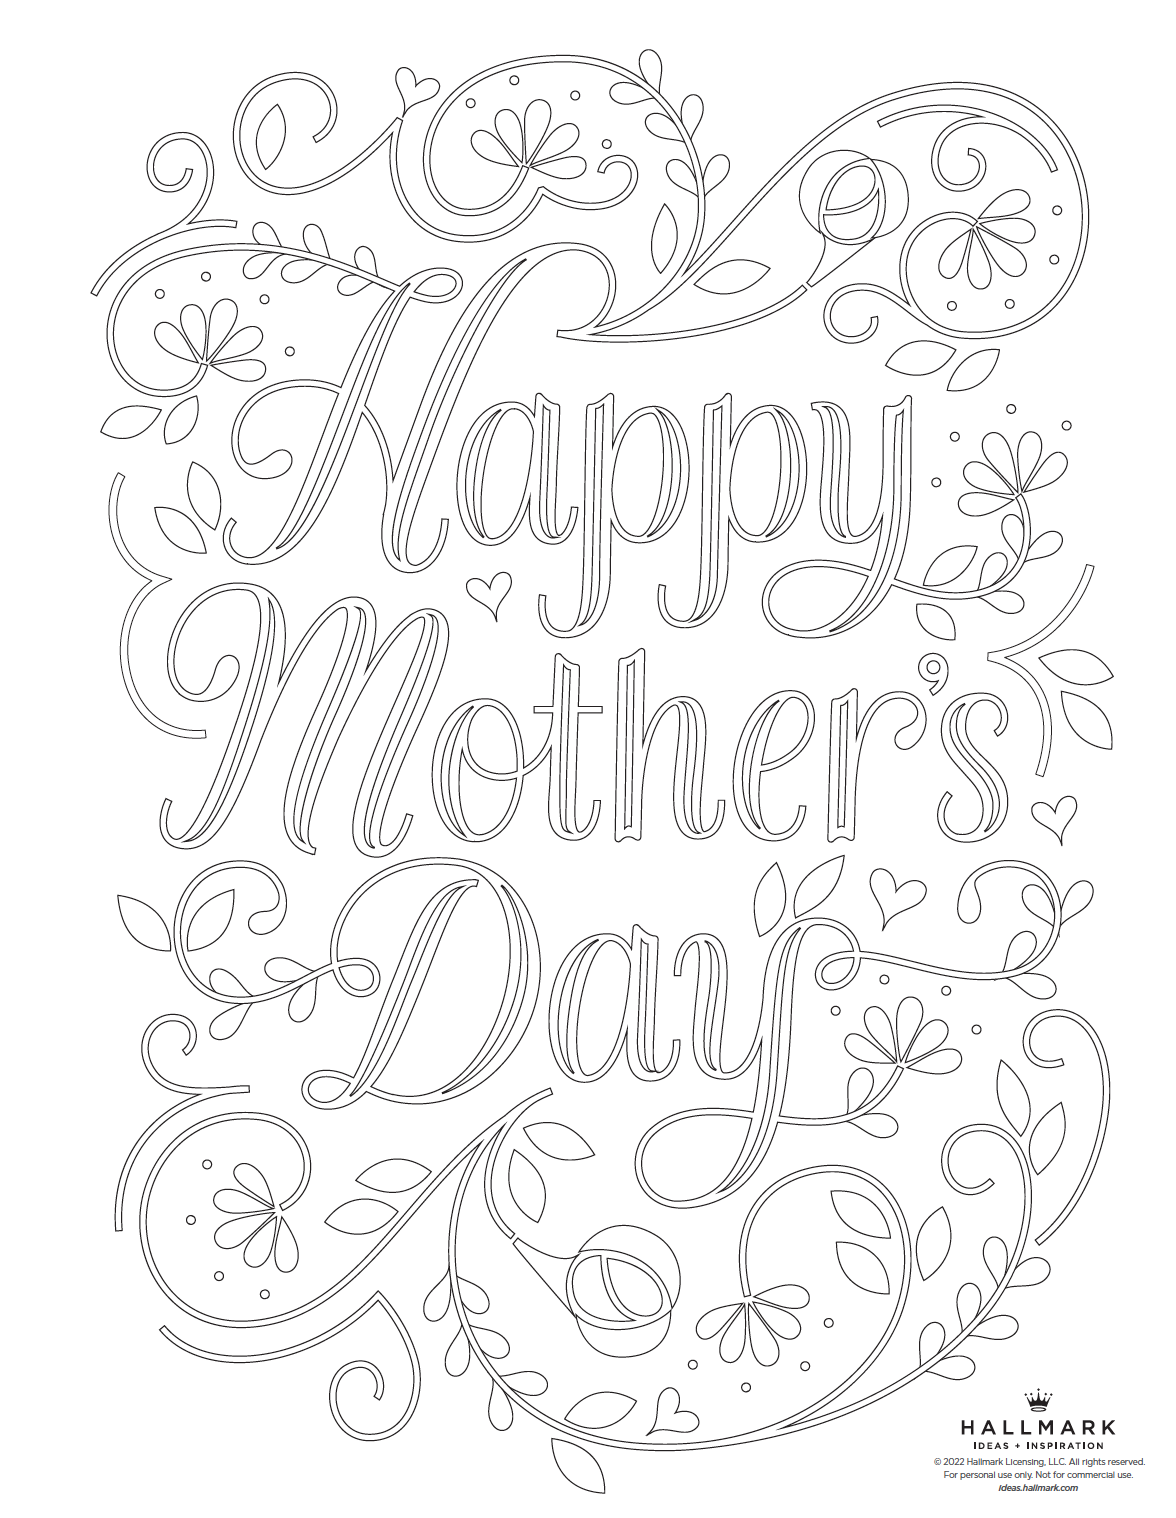 mother-s-day-coloring-pages-hallmark-ideas-inspiration